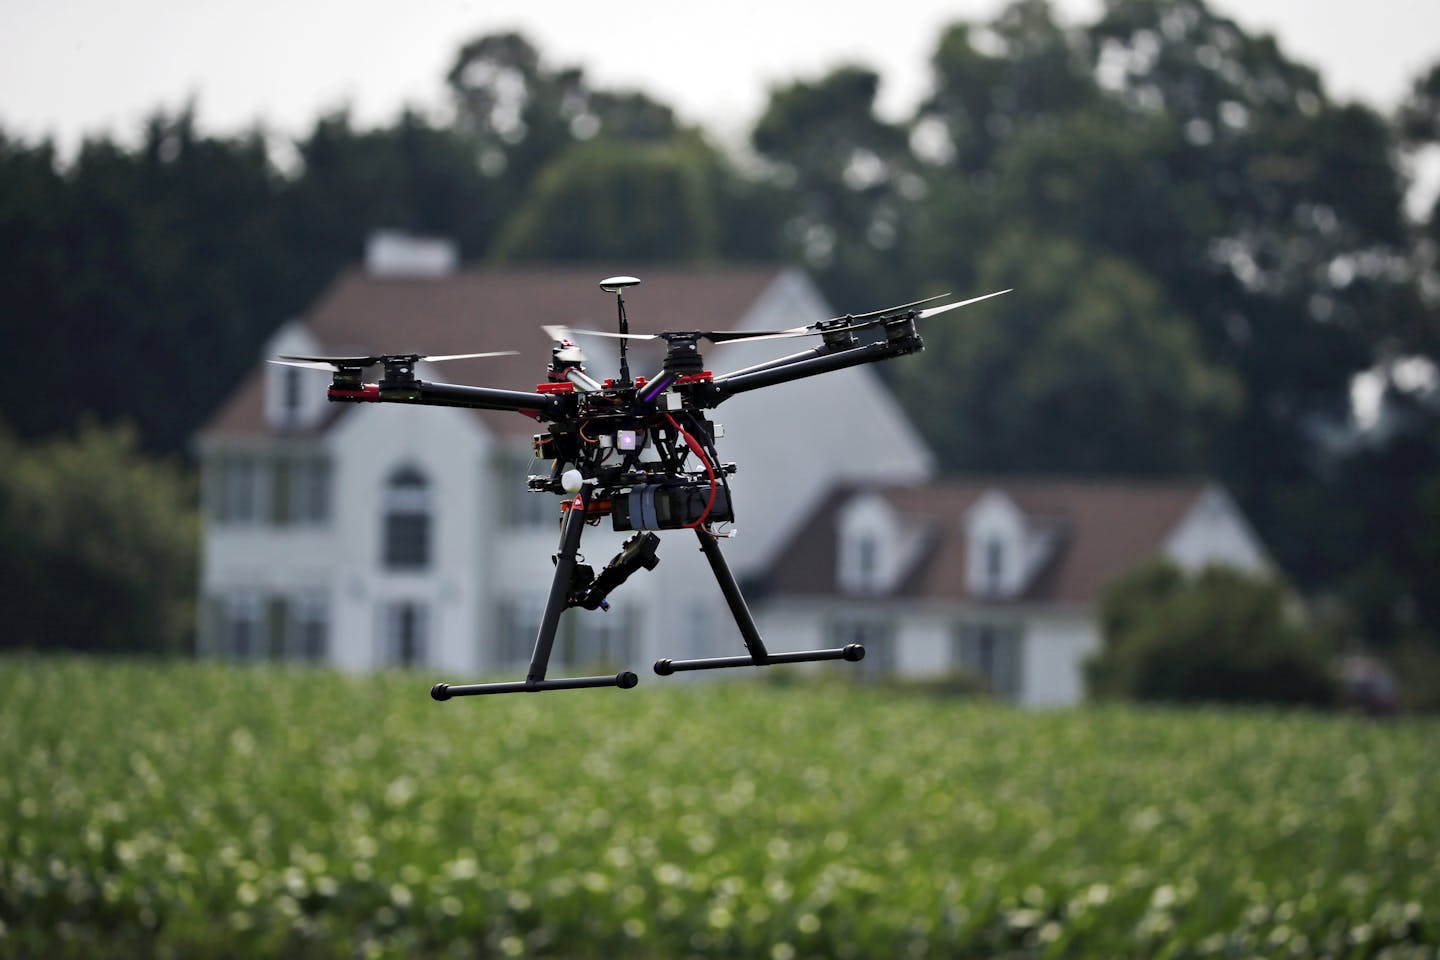 A small drone flying over a crop field, with a house in the background.